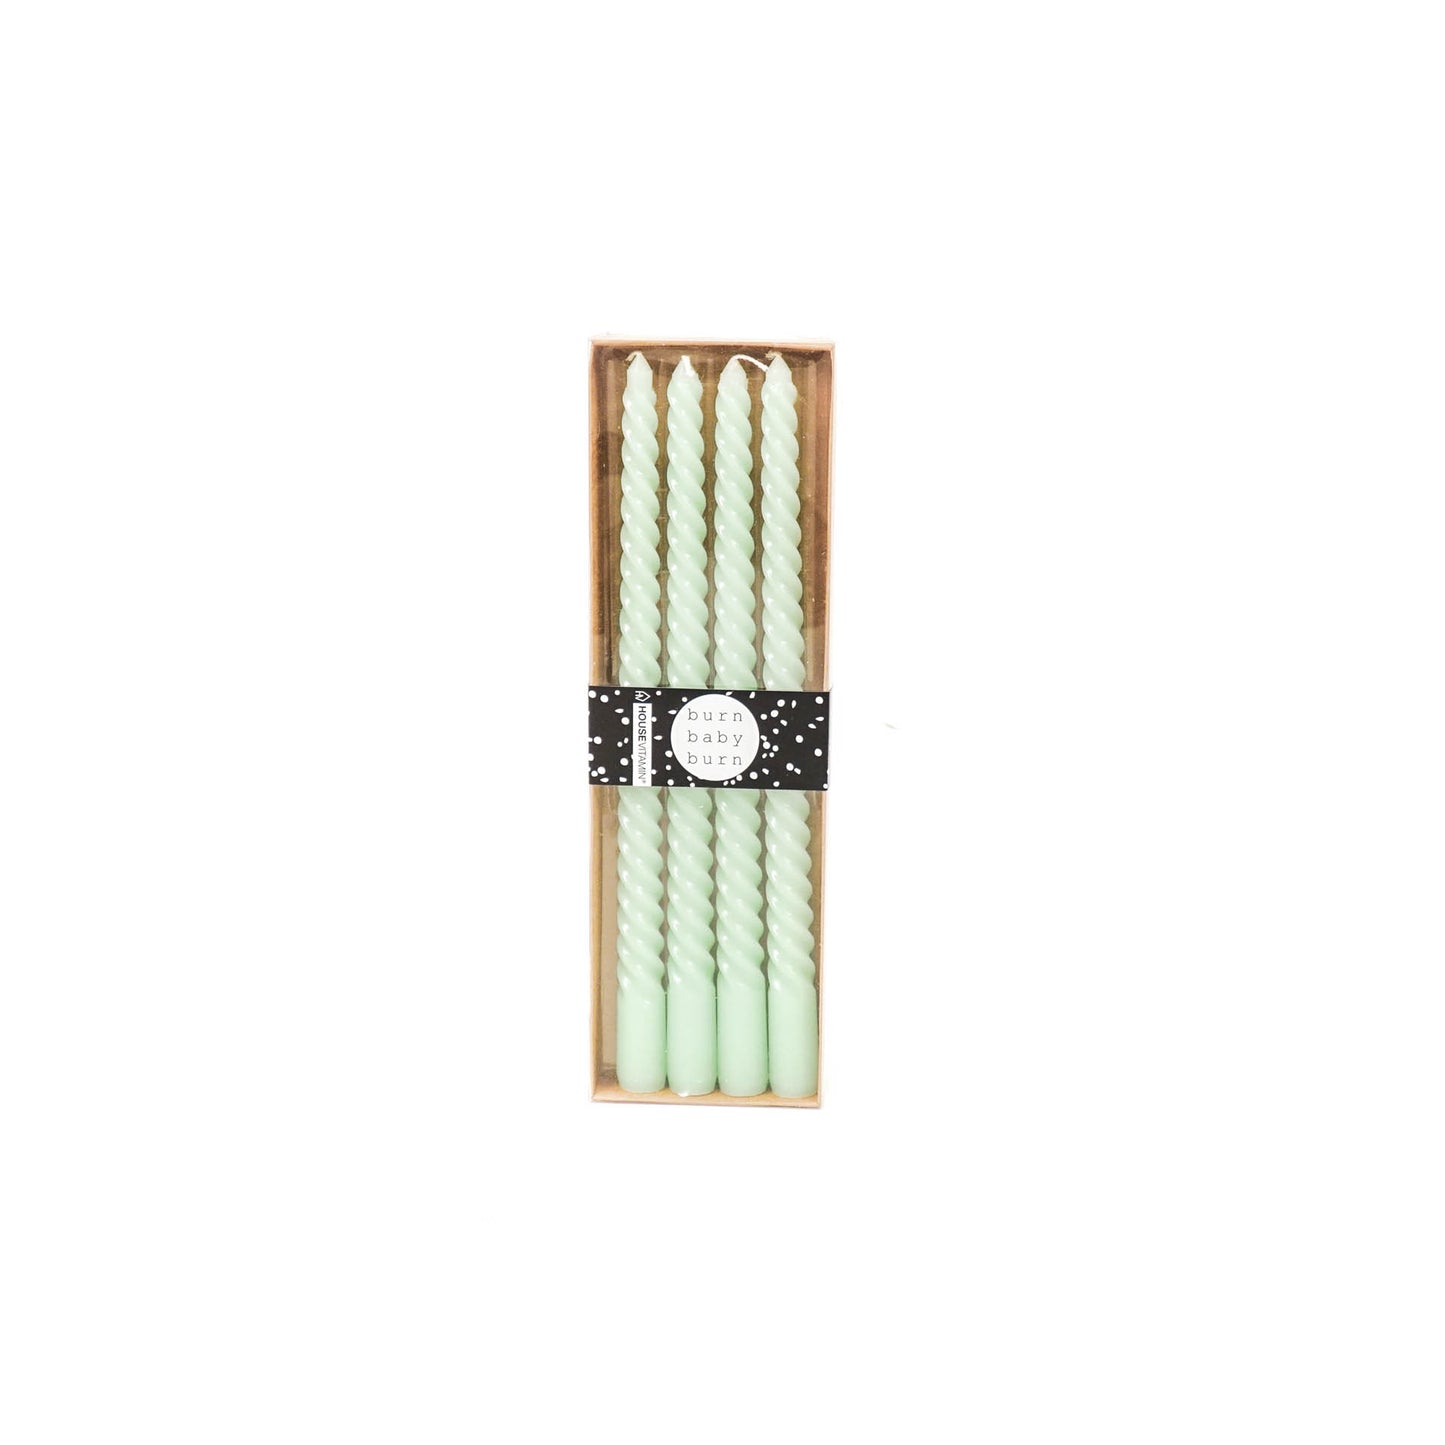 Housevitamin Twisted Candles - Set of 4 - Light Green - 2x30cm